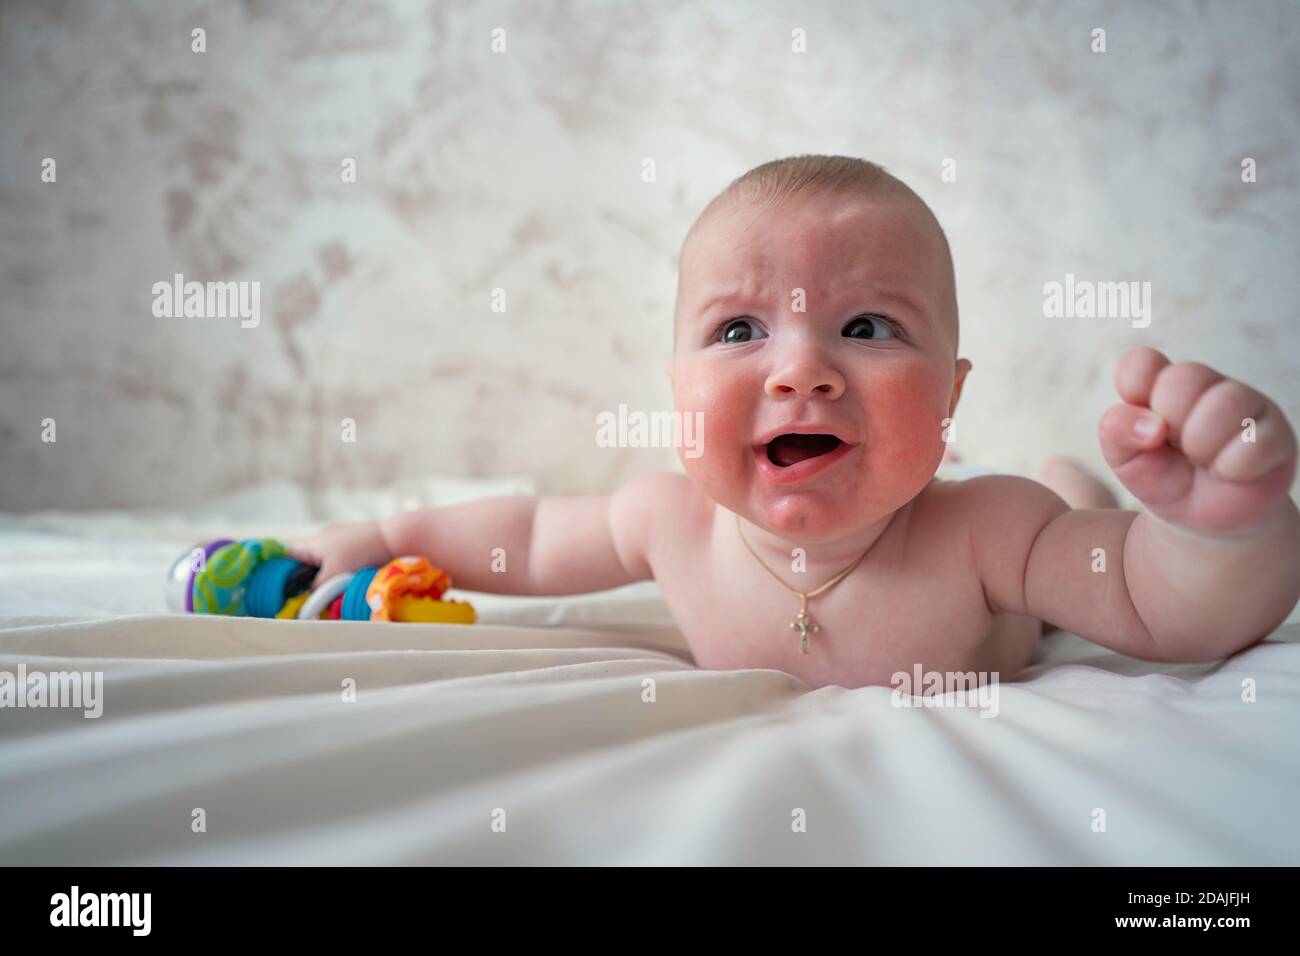 Close-up of a baby with skin Allergy lying on the bed. Close-up of a baby's face with skin Allergy. the baby is crying Stock Photo